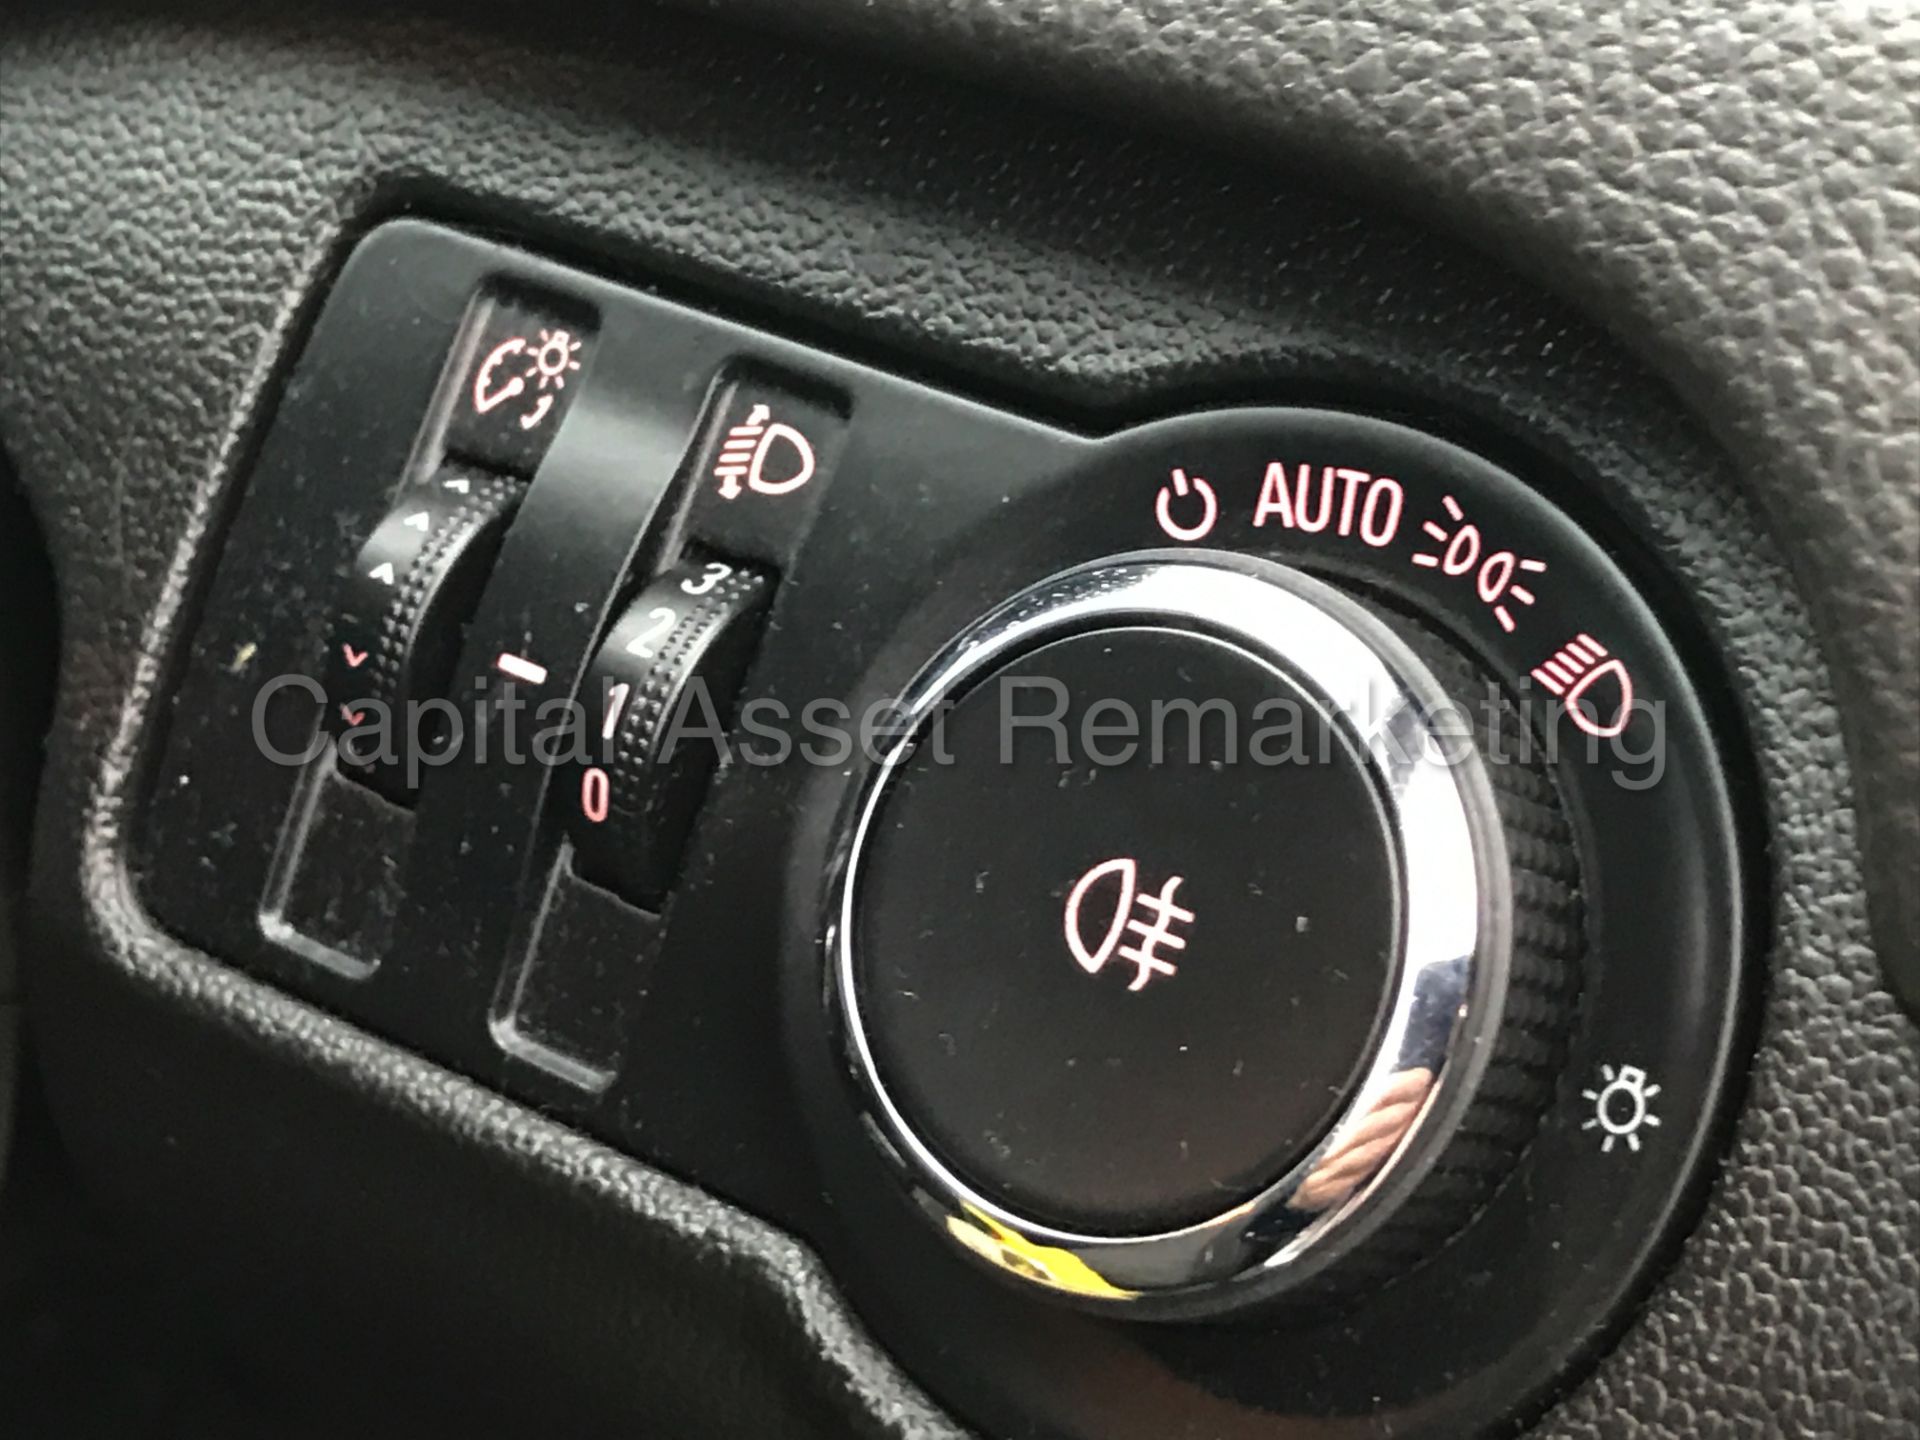 VAUXHALL INSIGNIA 'EXCLUSIVE' (2012) '2.0 CDTI - 6 SPEED - STOP/START - AIR CON' *1 FORMER KEEPER* - Image 23 of 26